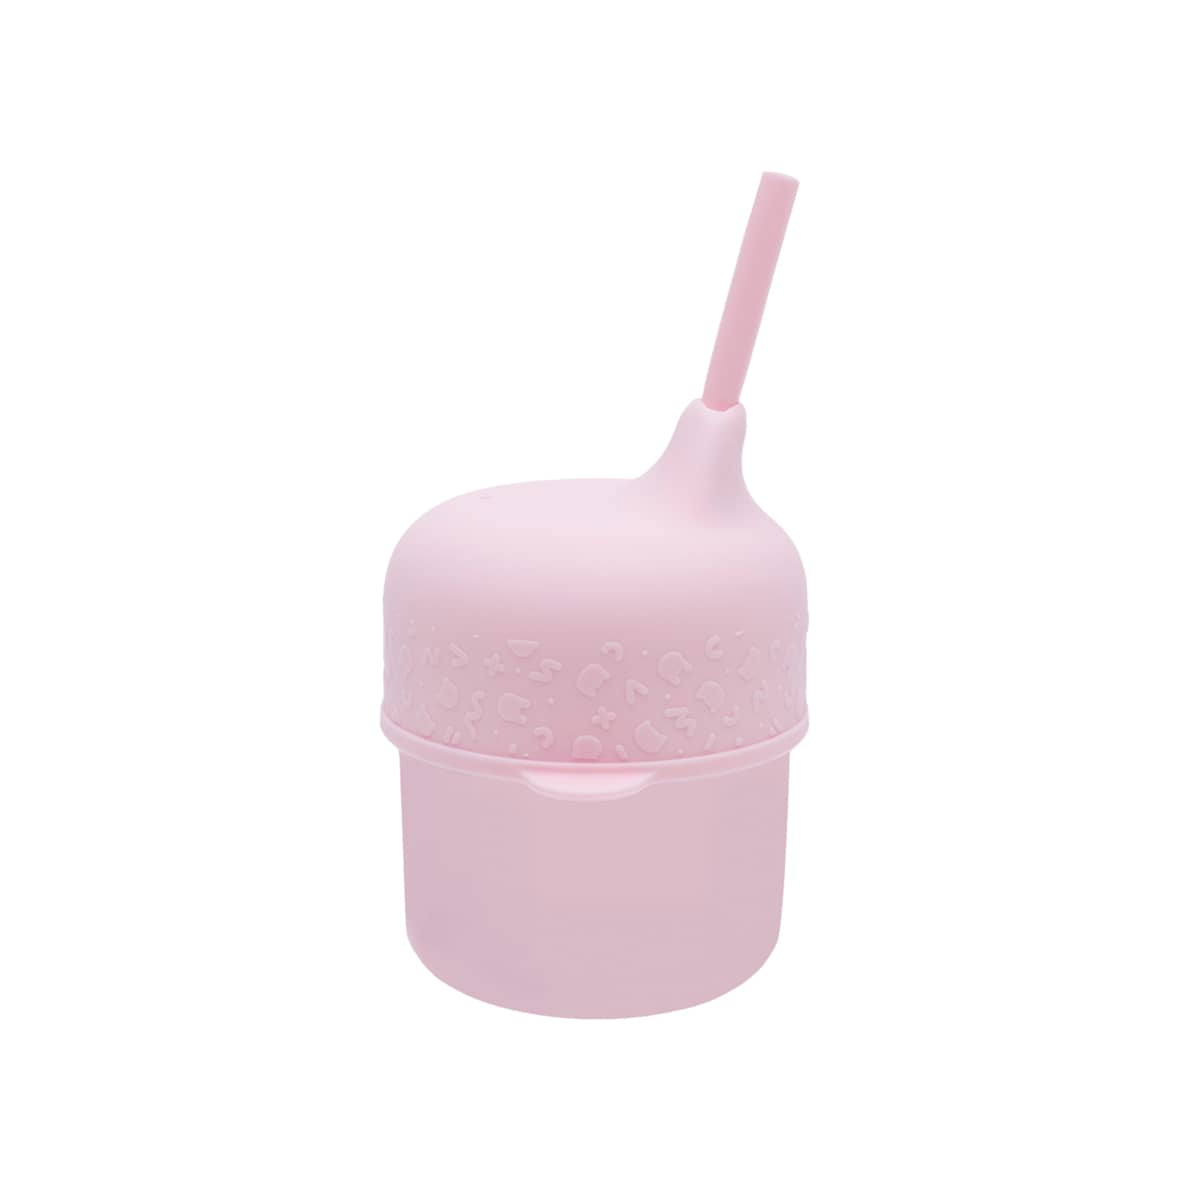 We Might Be Tiny Silicone Sippy Cup Set - Powder Pink